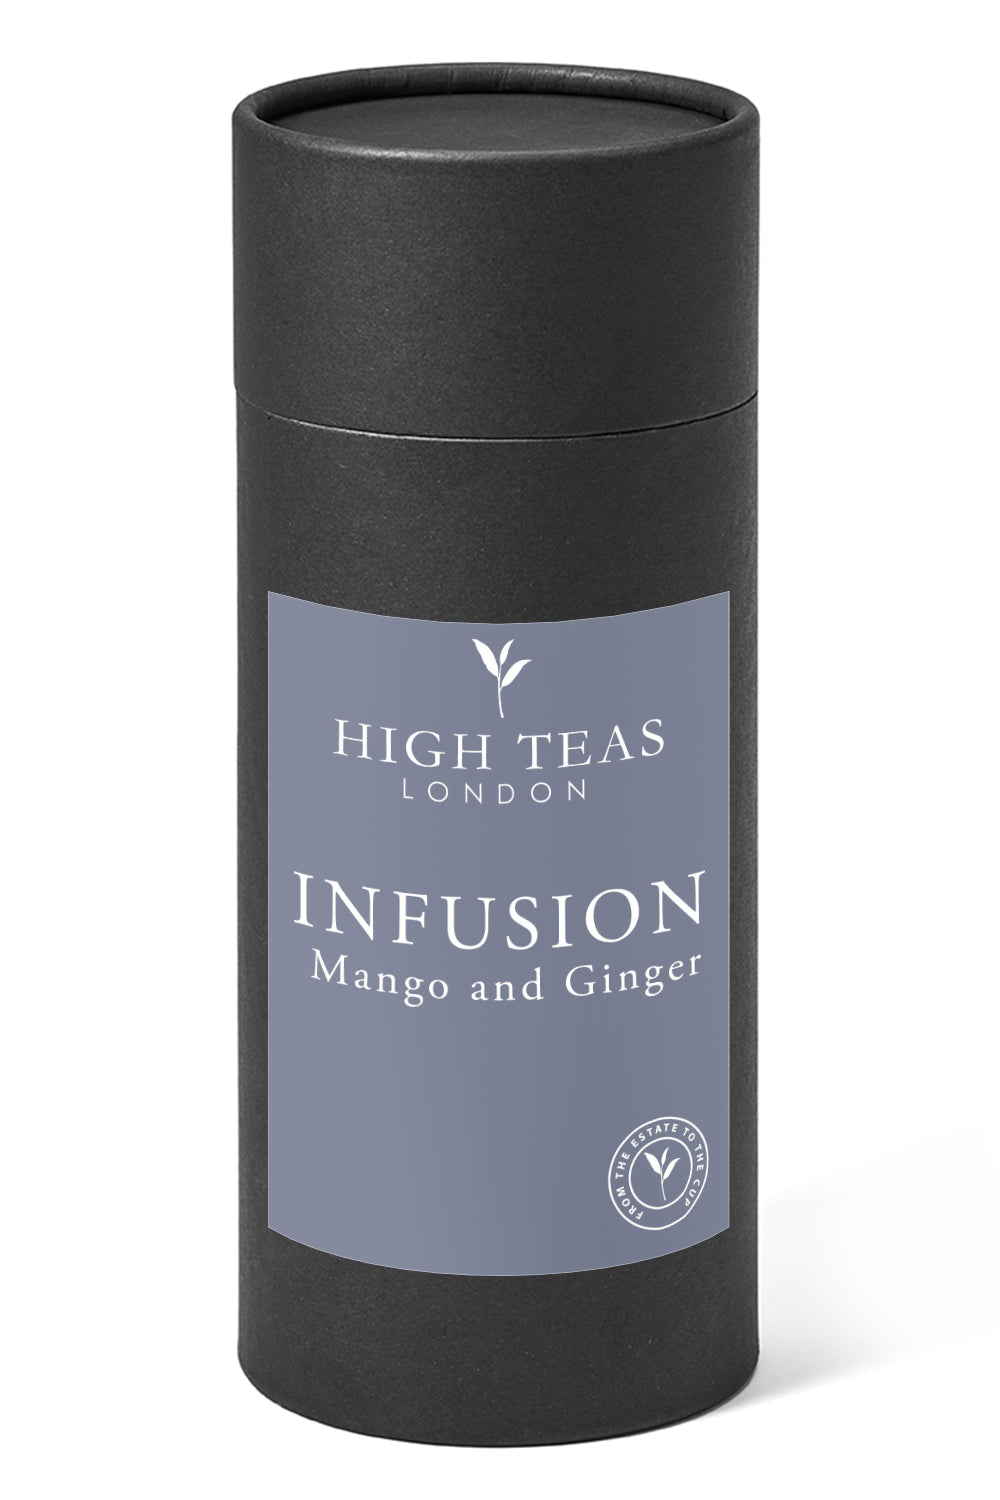 Mango and Ginger infusion-150g gift-Loose Leaf Tea-High Teas